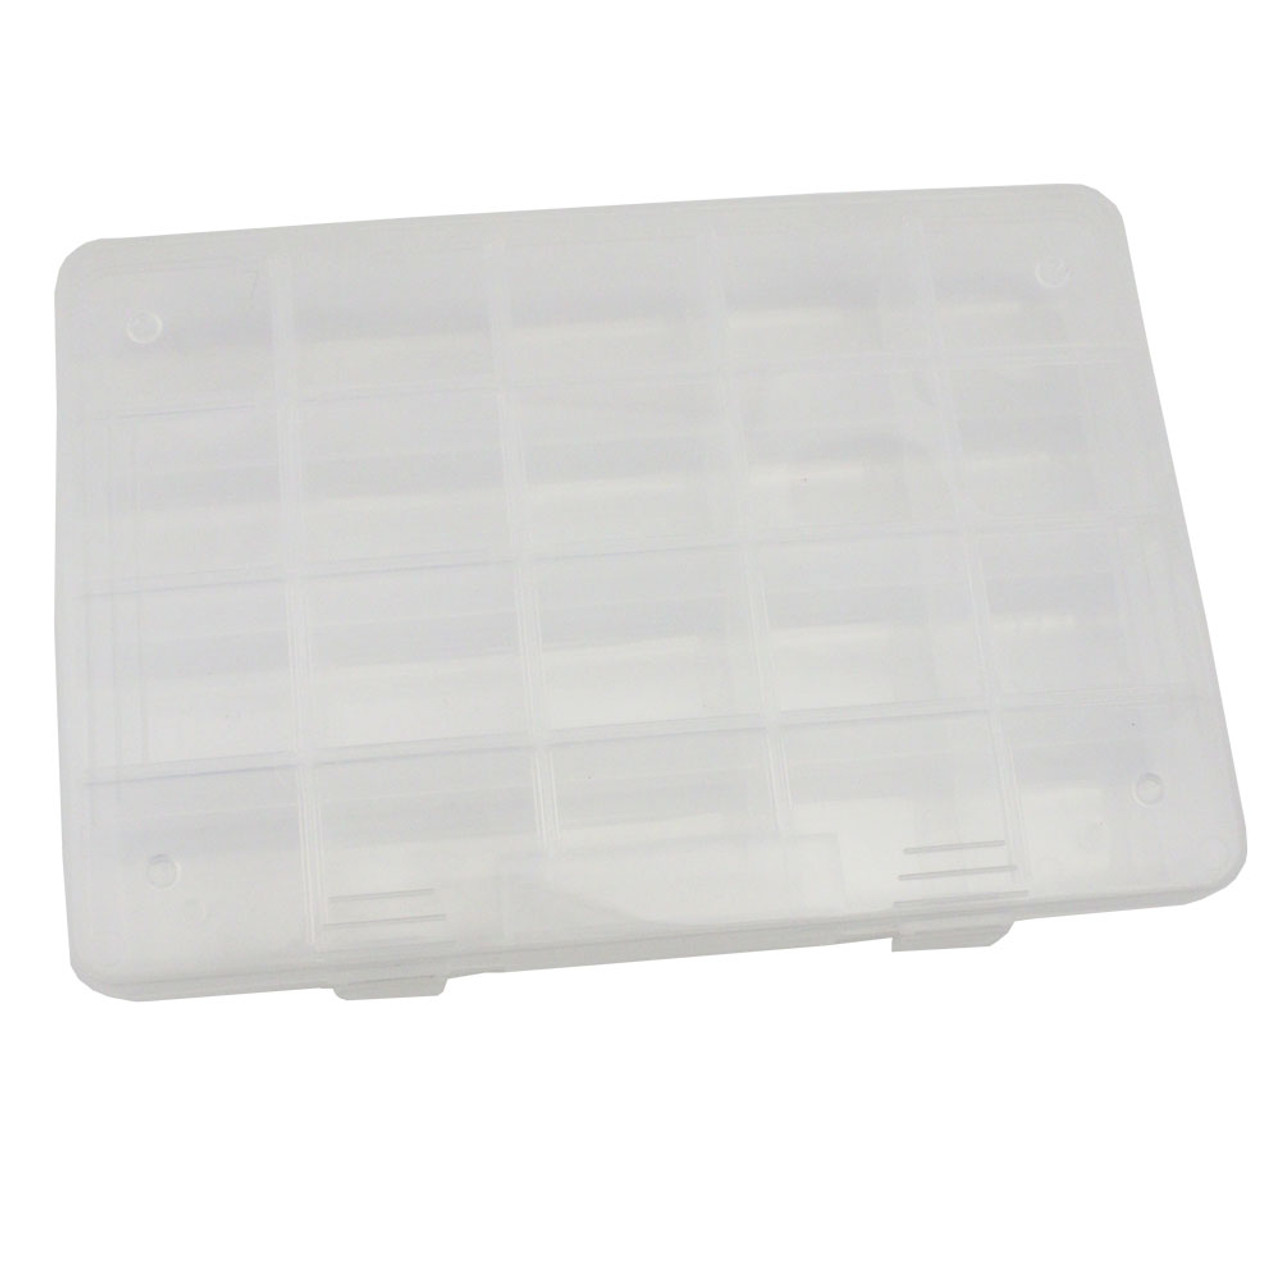 Parts Keeper Box Large 20 Compartment Box Clearance | Esslinger